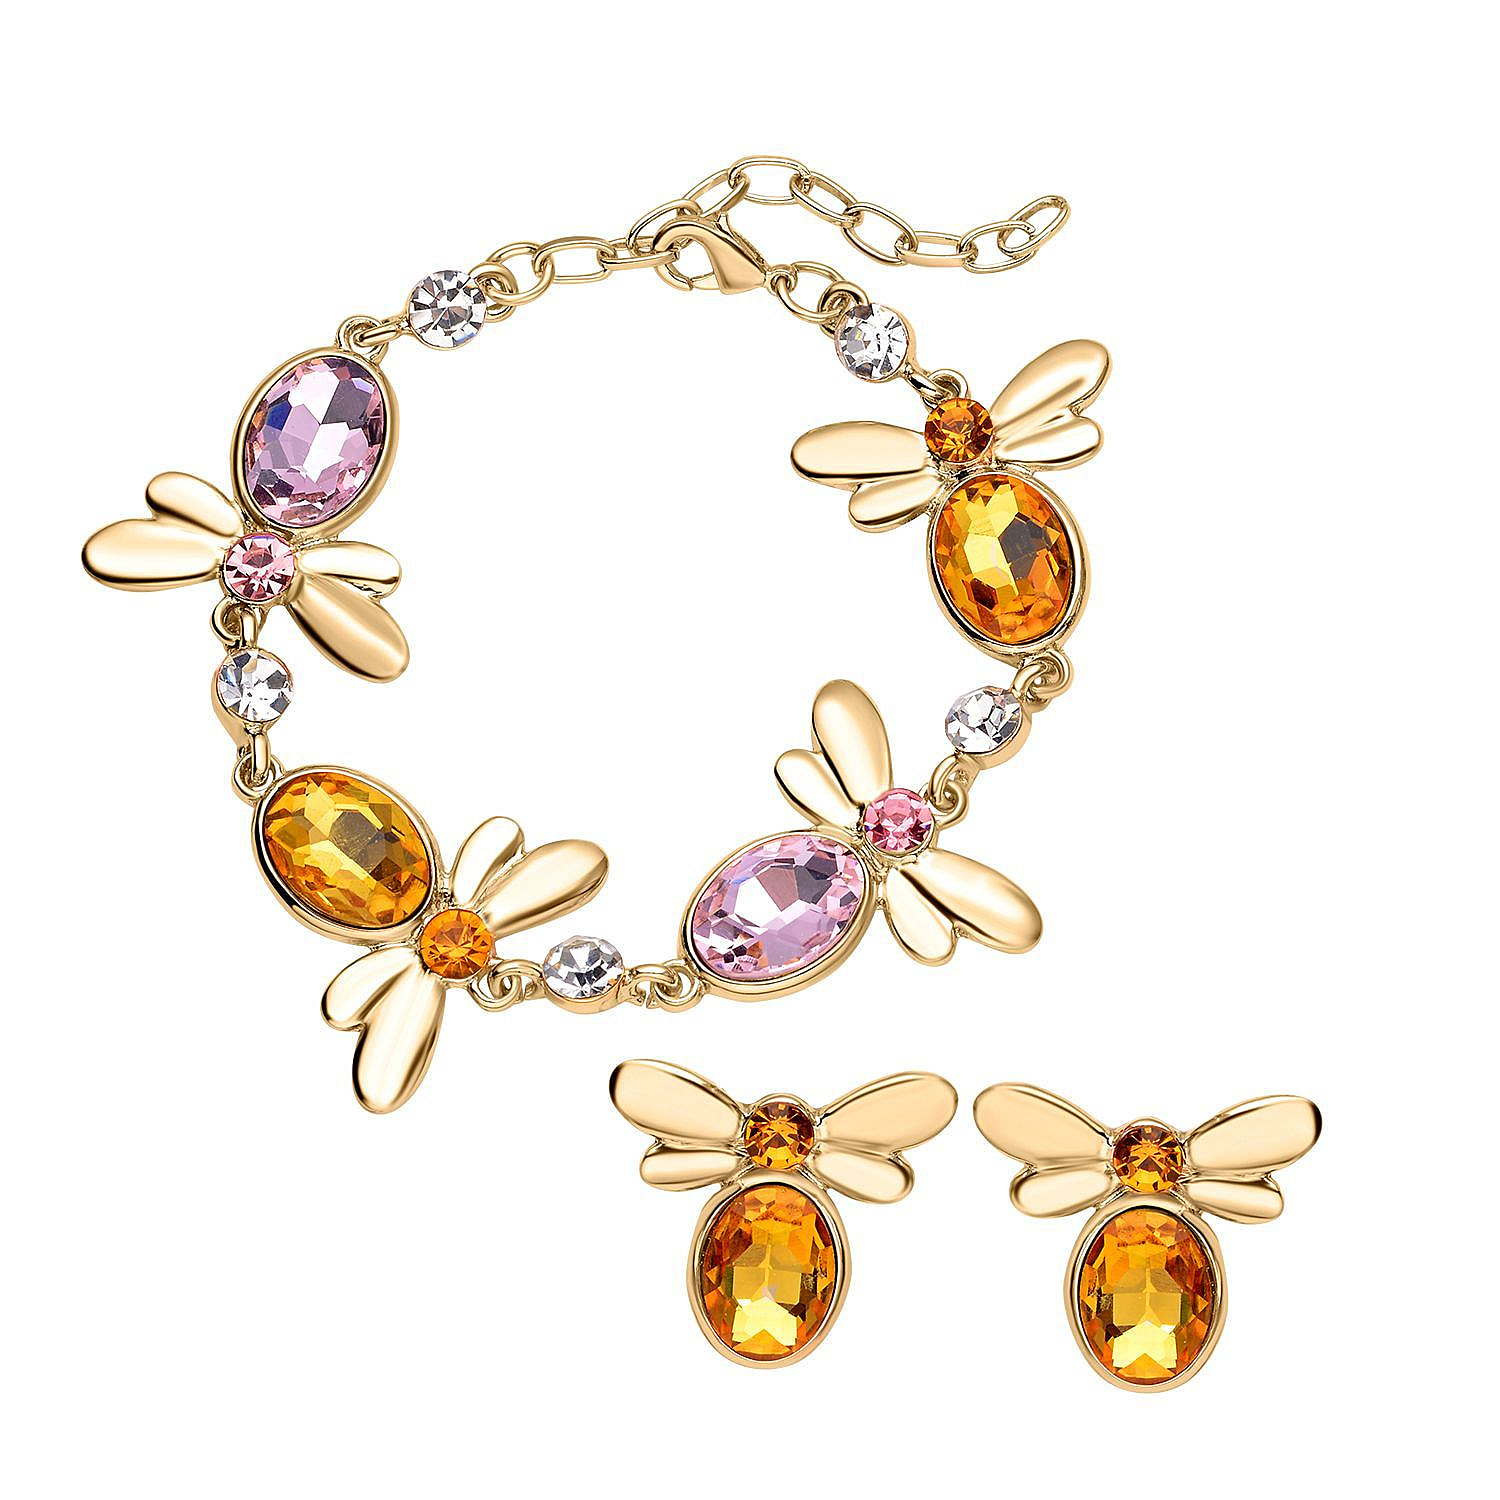 2 Piece Set - Simulated Pink Sapphire, Simulated Citrine and Multi Colour Austrian Crystal Honey Bee Bracelet (Size- 7-2 Inch Ext.) & Earrings in Yellow Tone